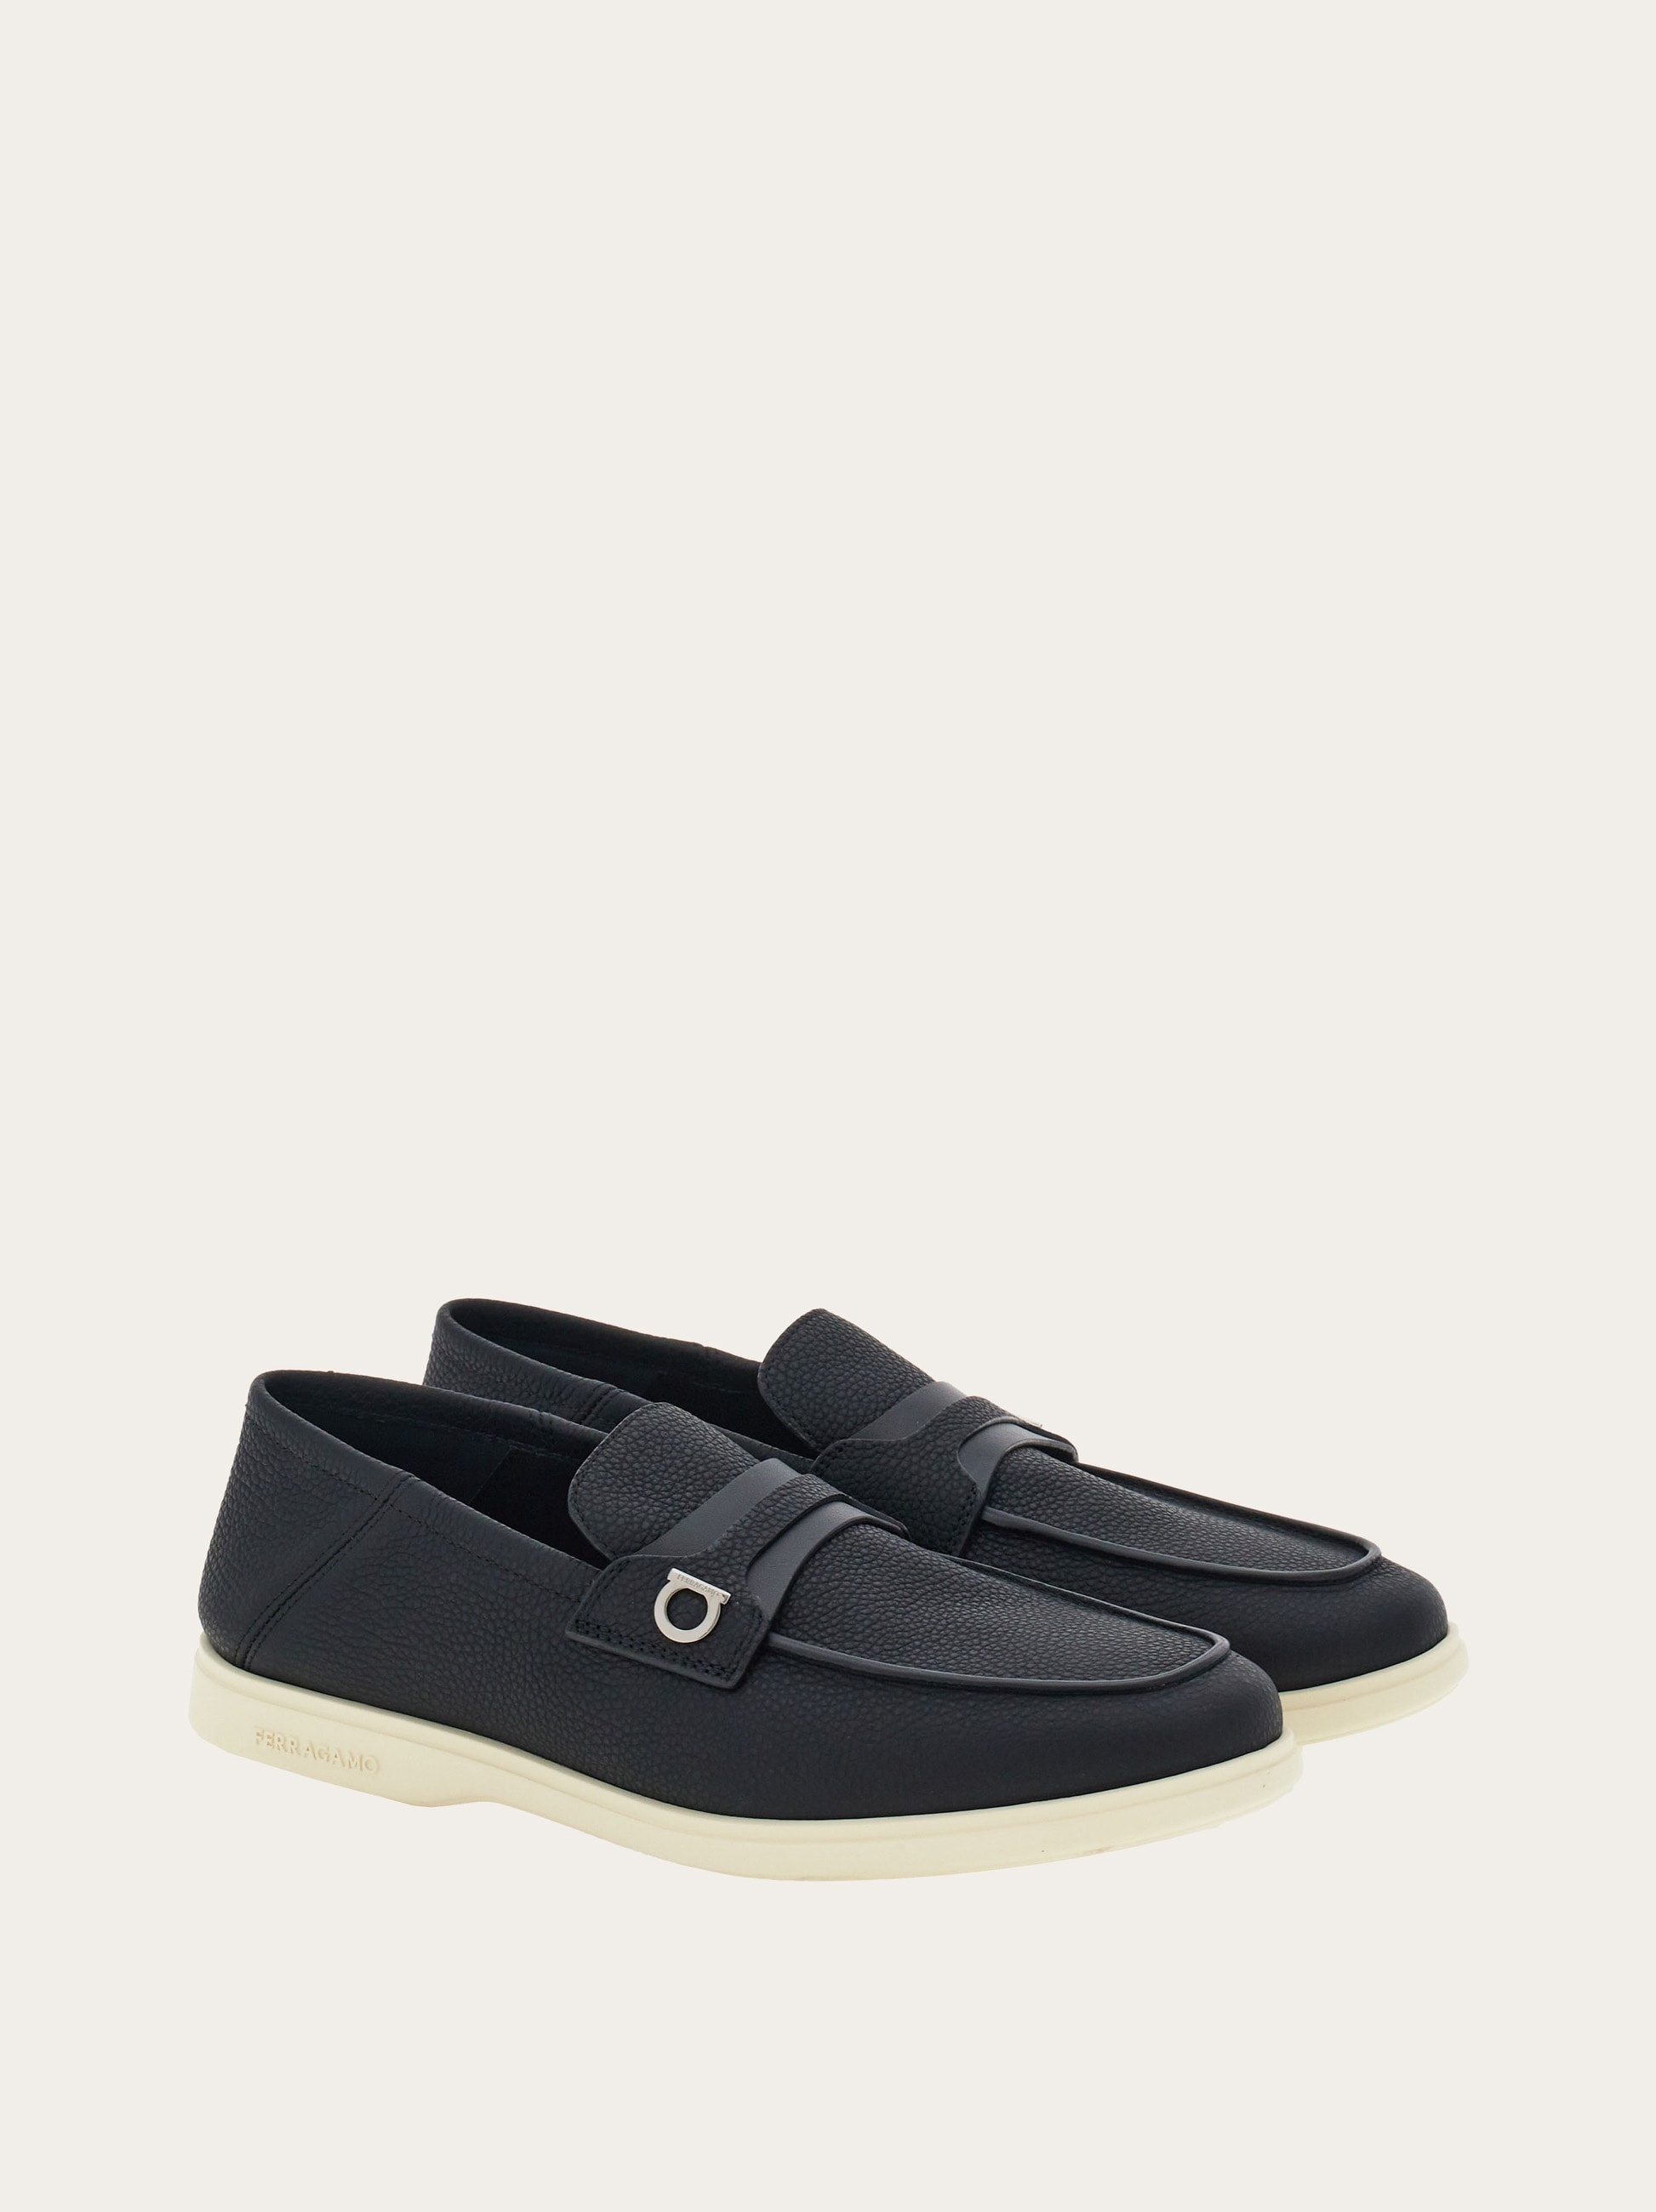 Deconstructed loafer with Gancini ornament - 4